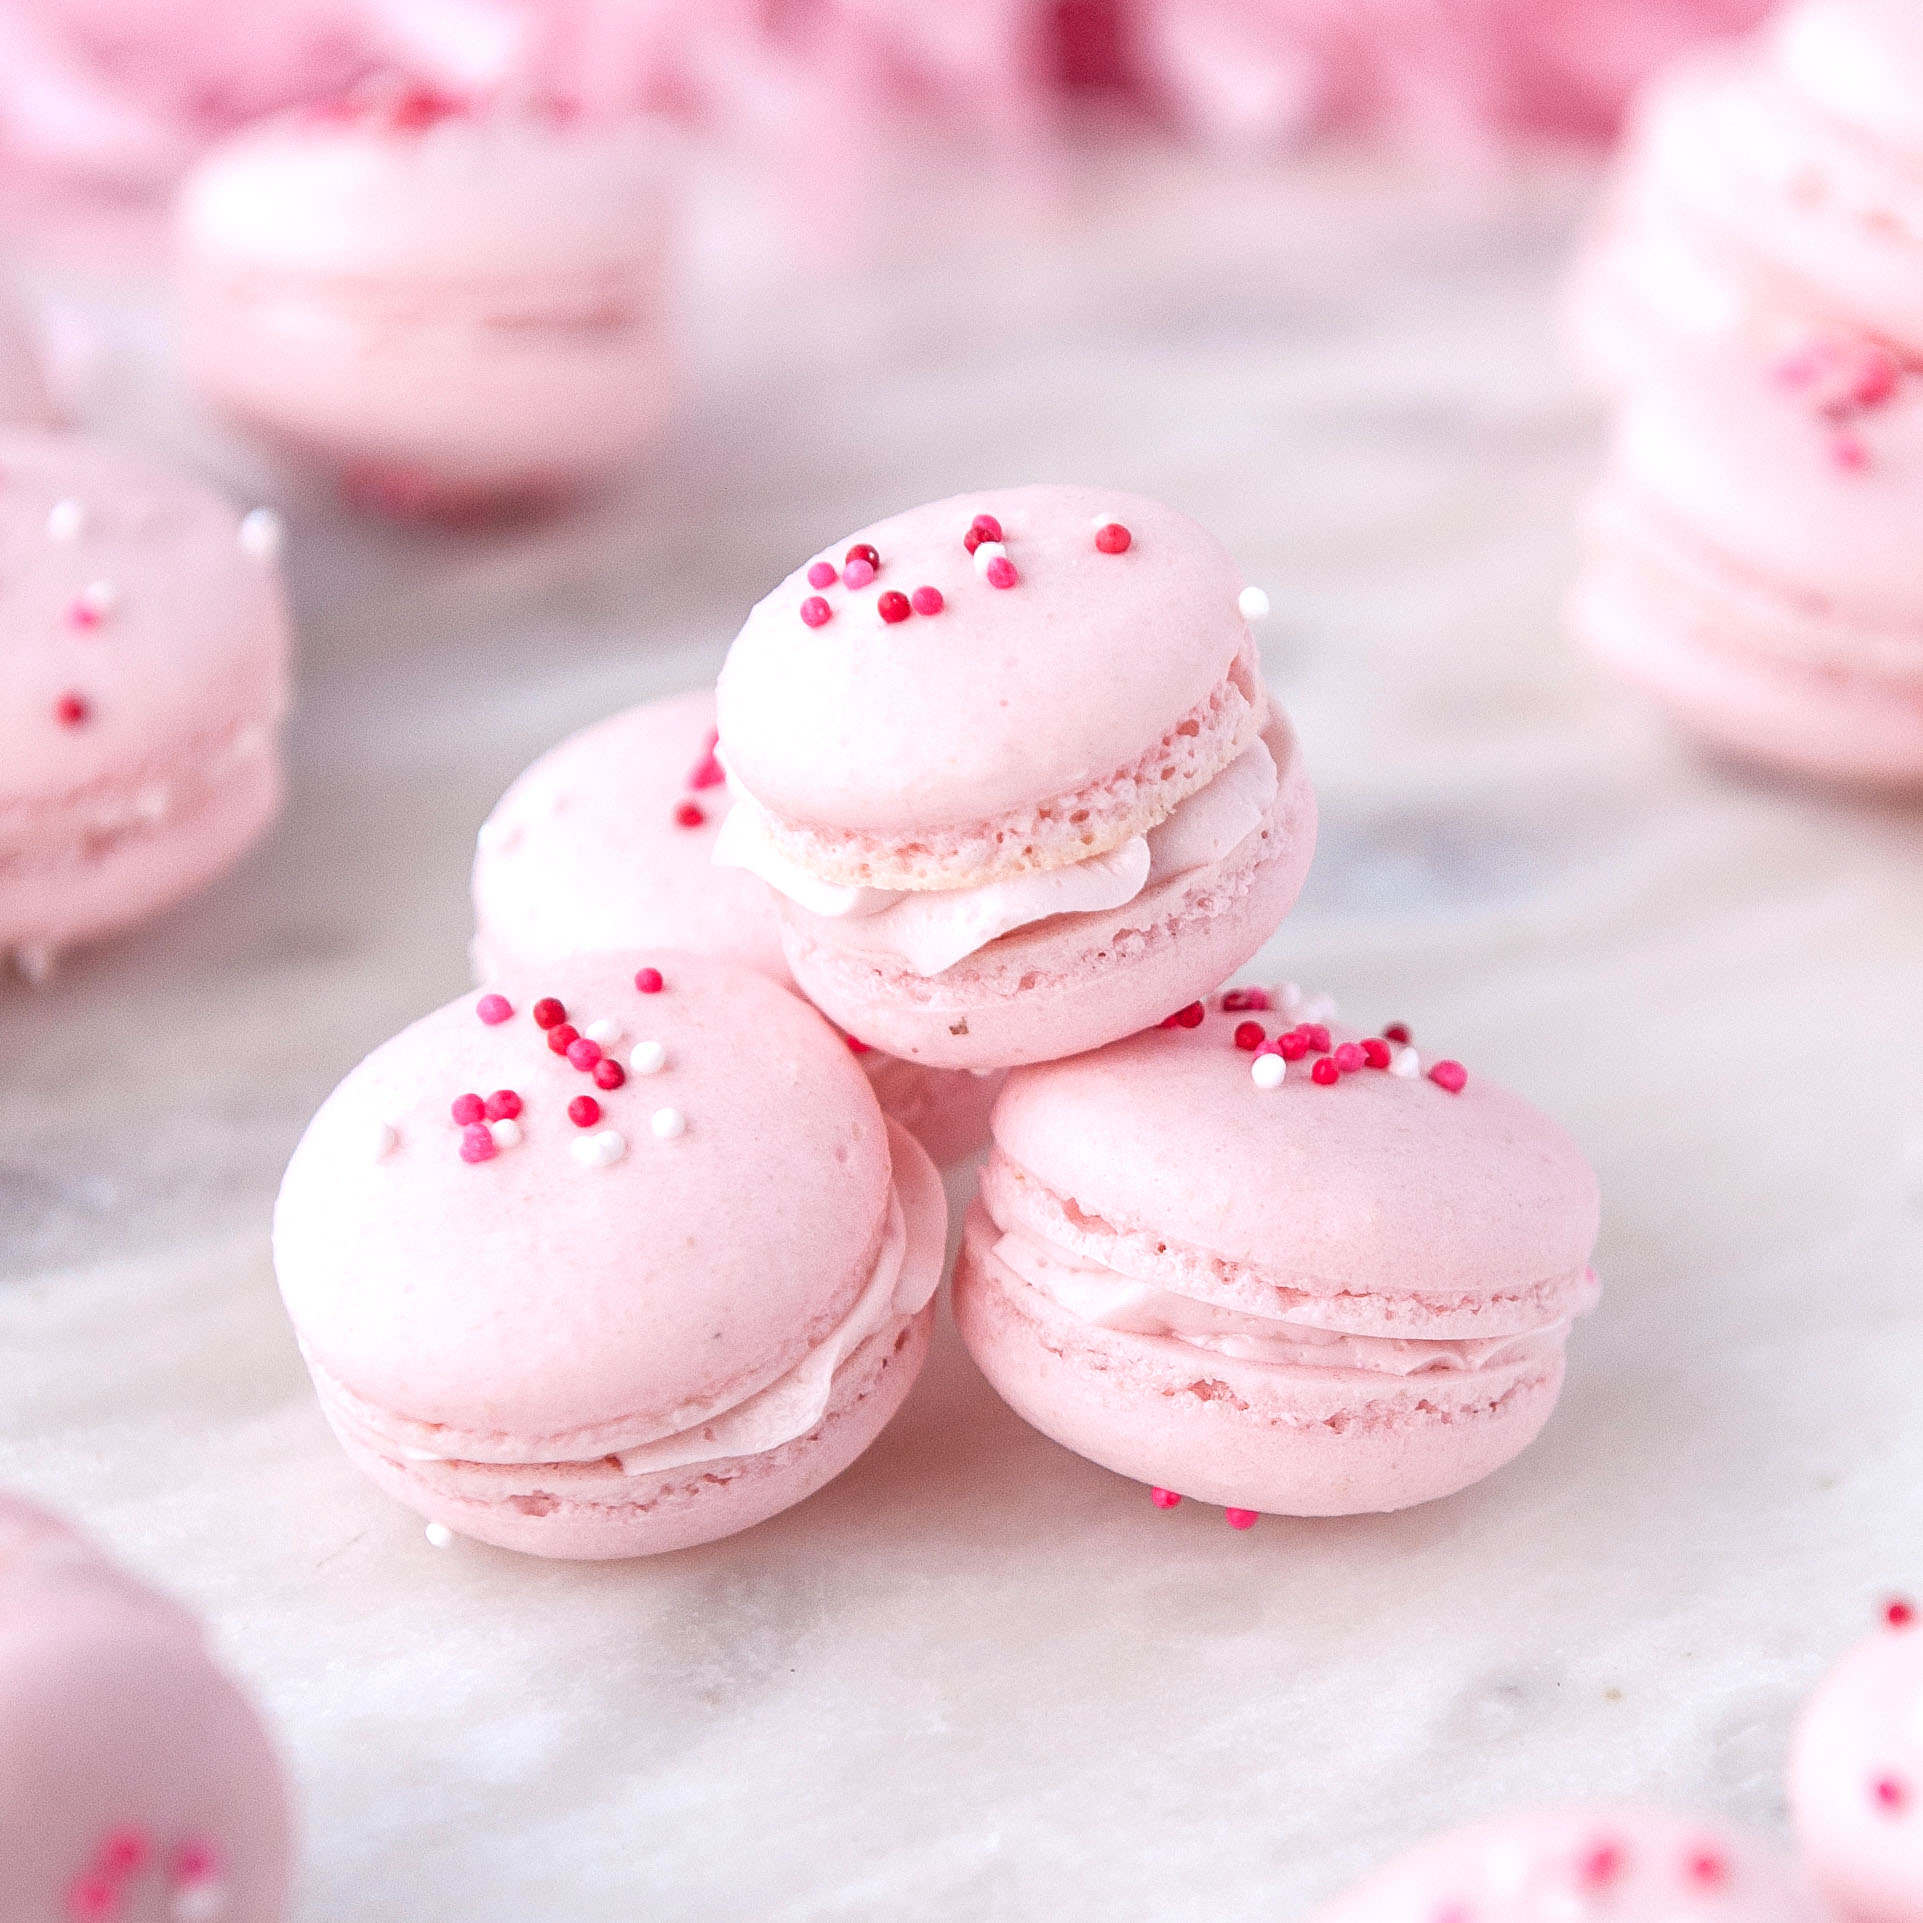 Strawberry Macaron Recipe Easy Step By Step Sugar Geek Show,Mimosa Recipes Without Orange Juice